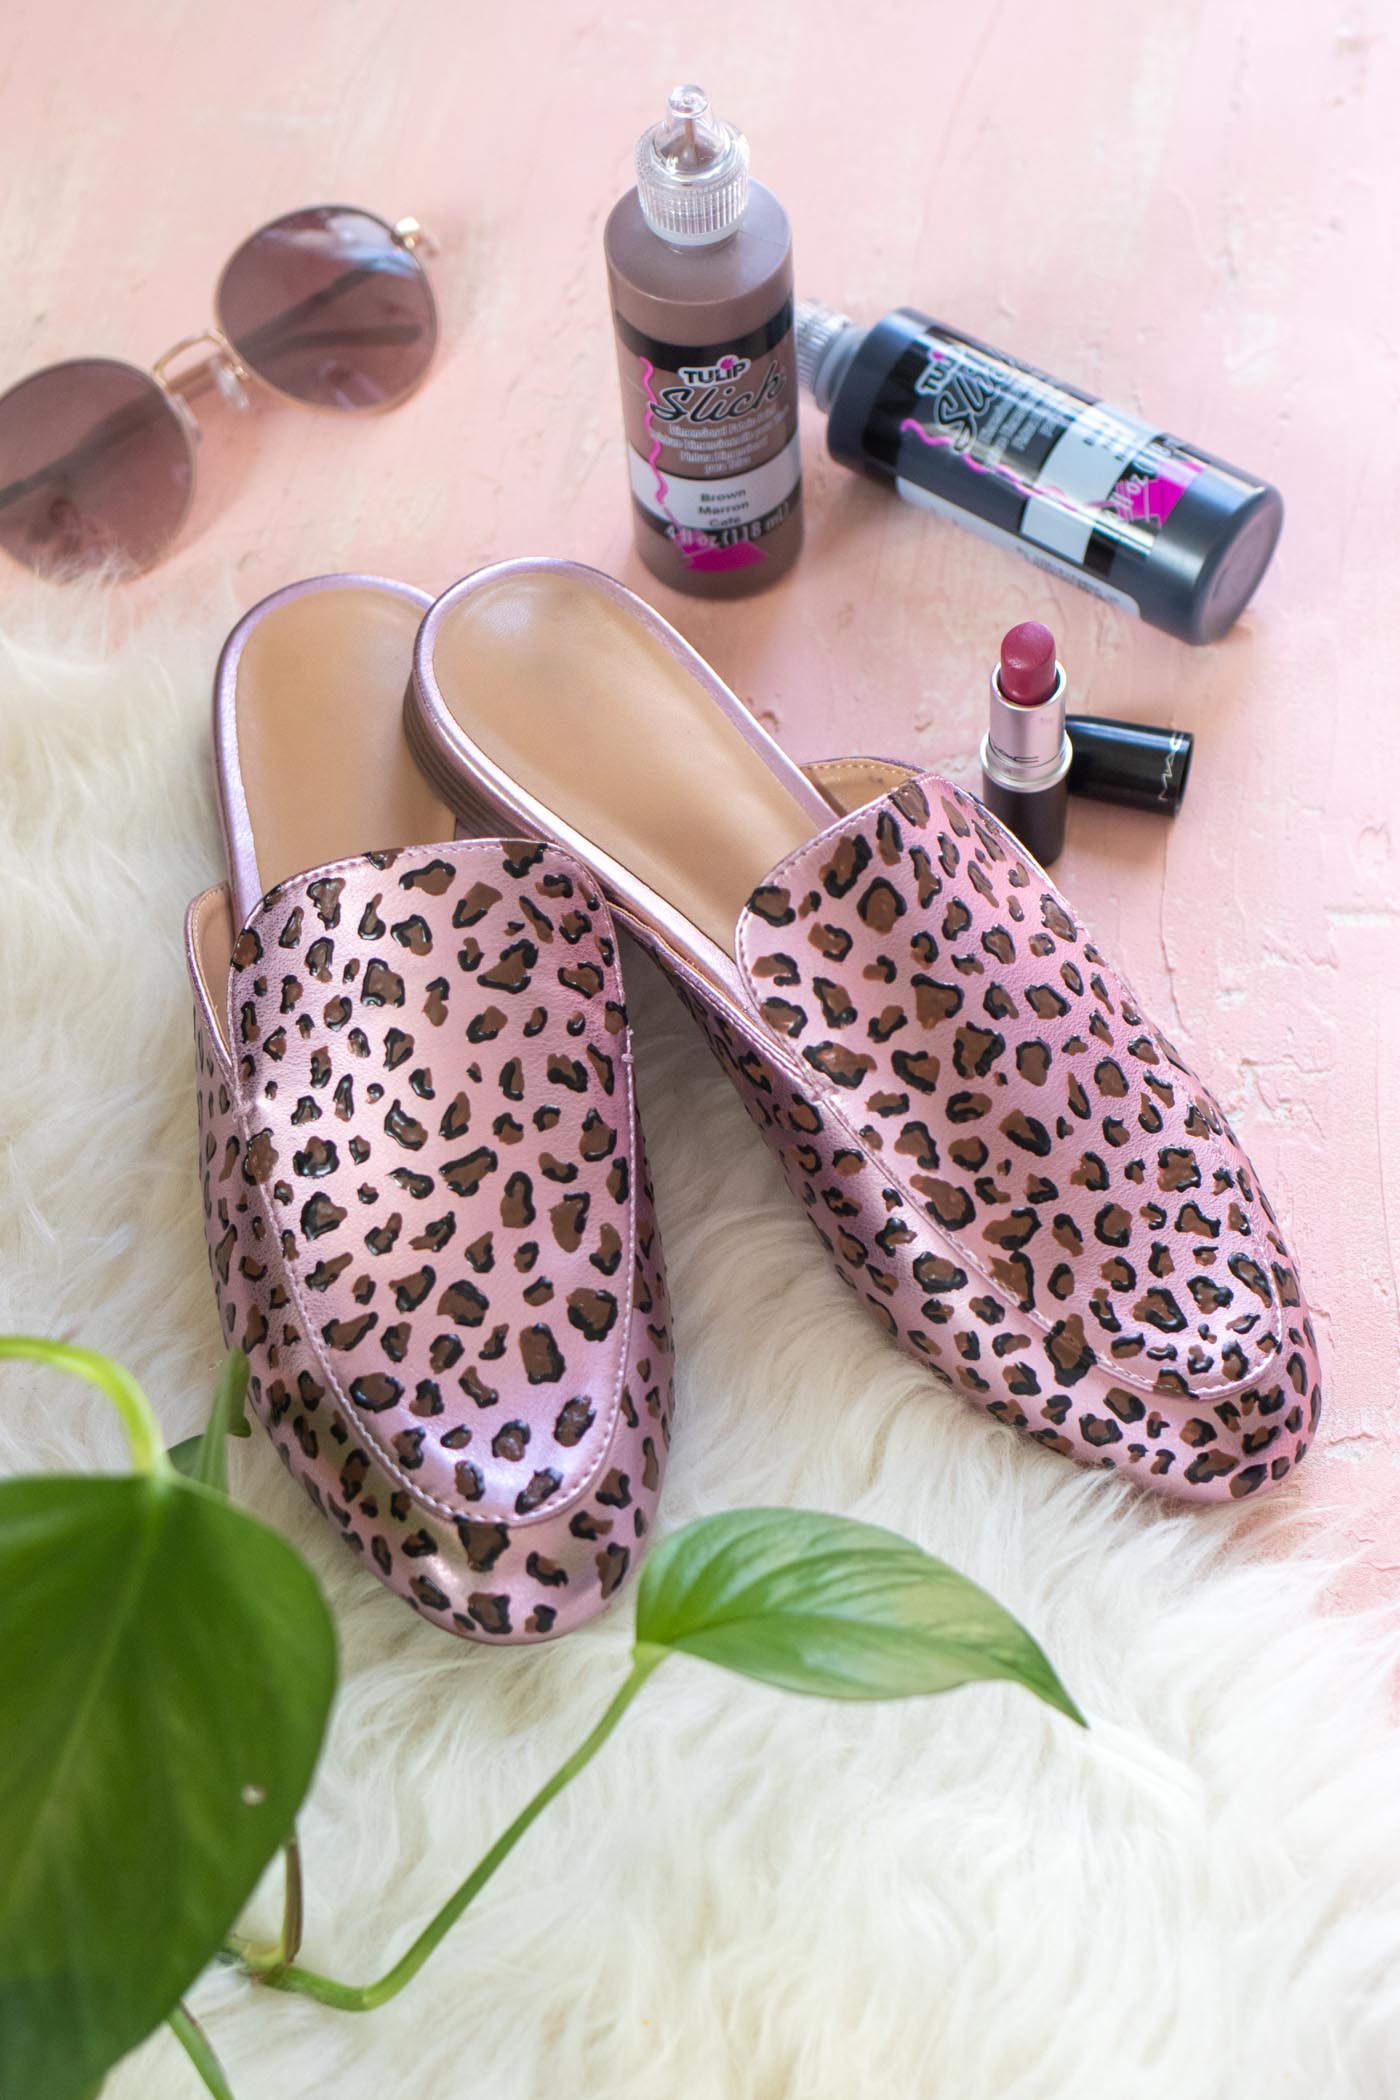 DIY Leopard Print Shoes // Painted Shoe Makeover by Club Crafted